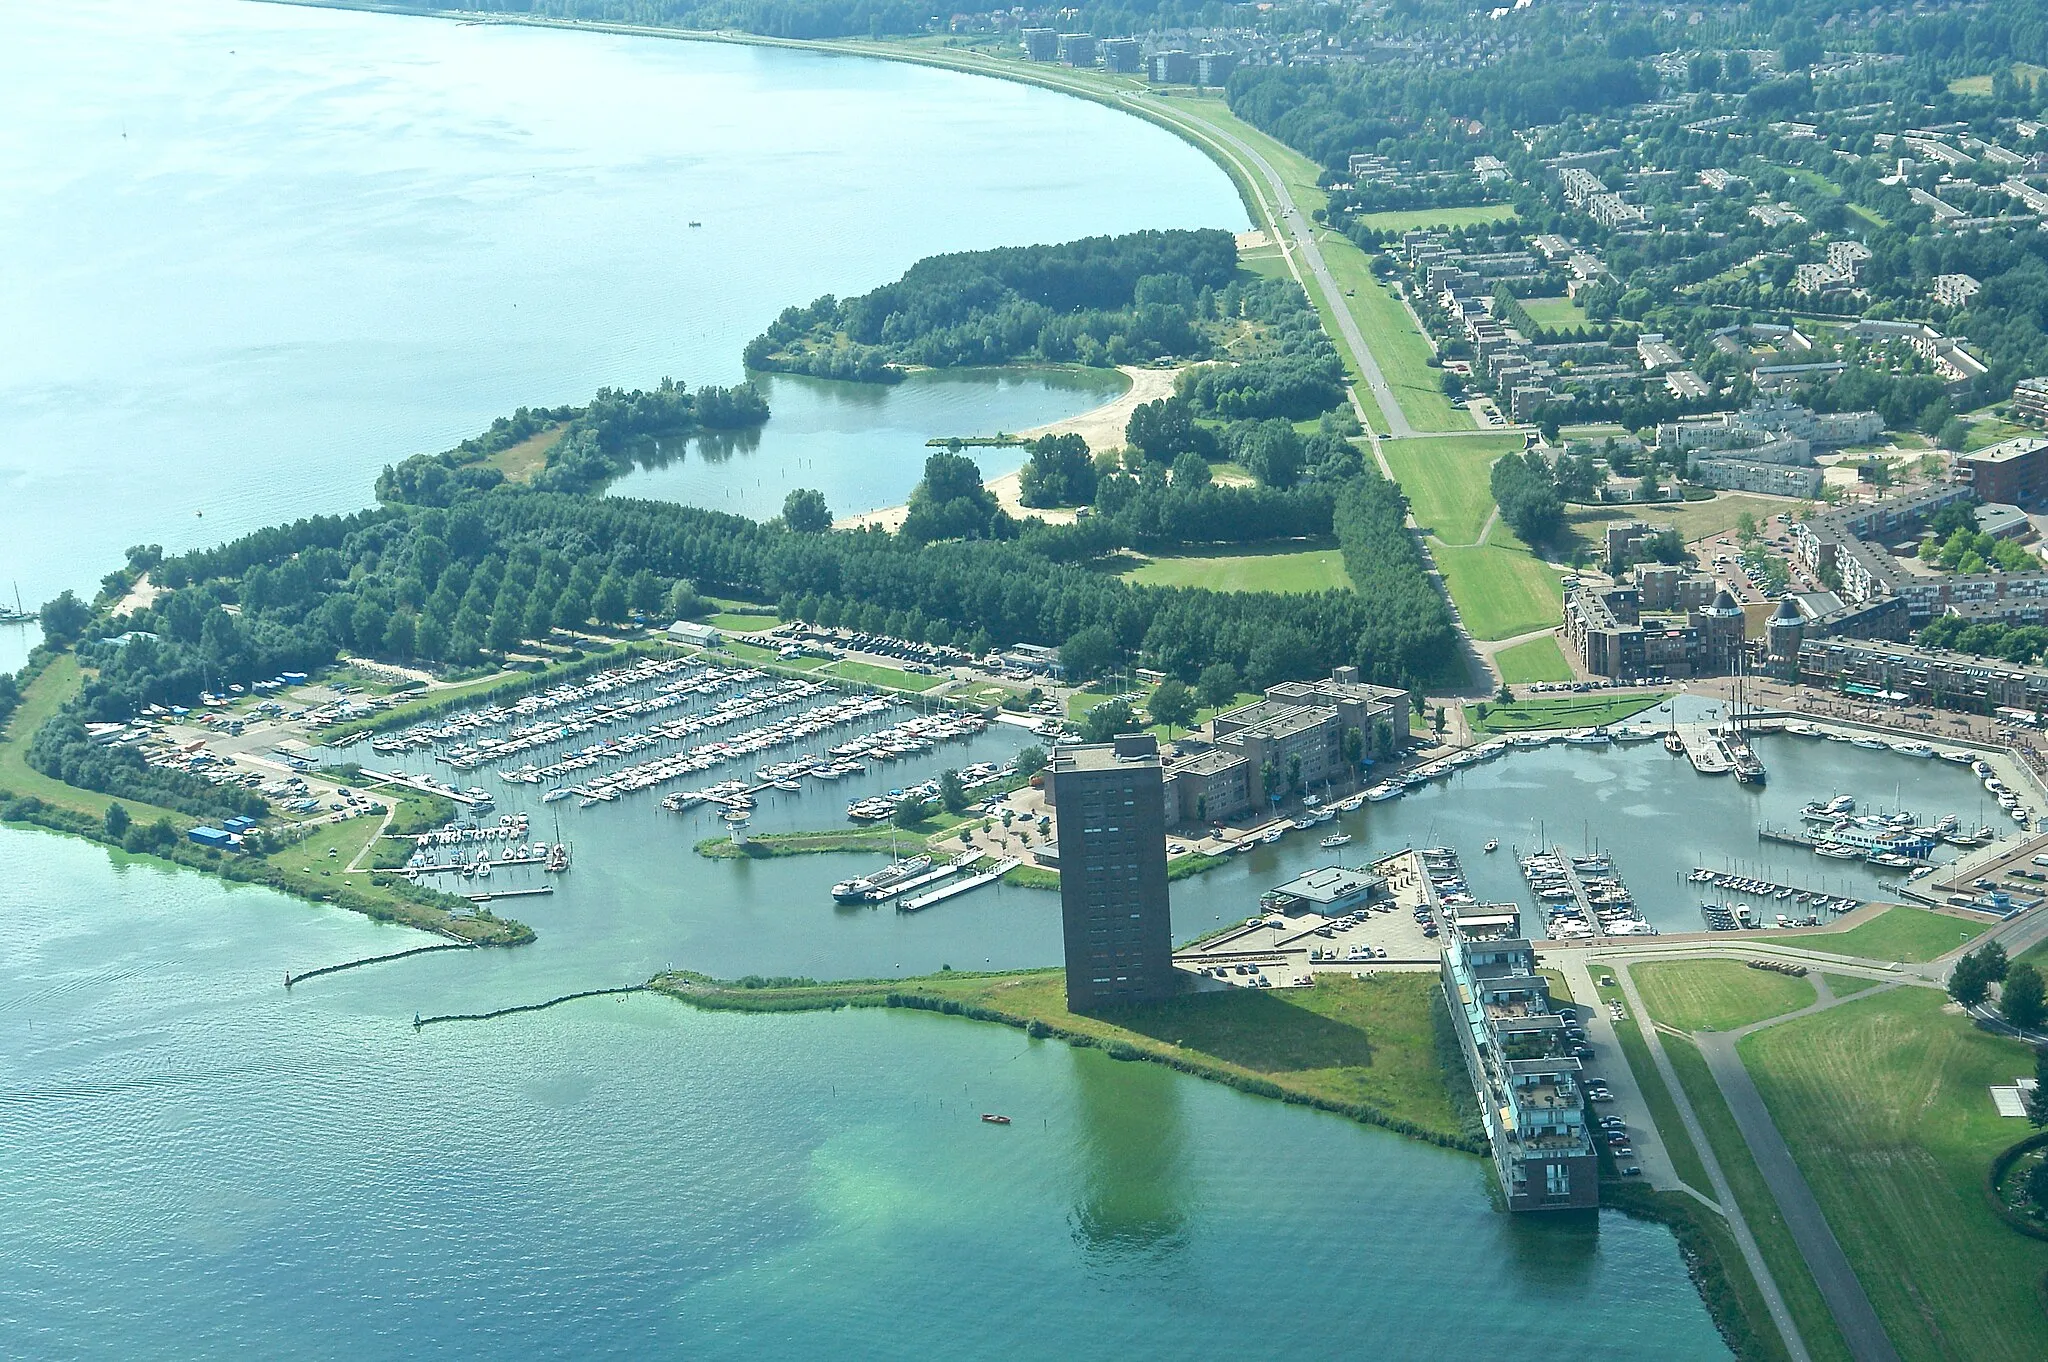 Image of Almere Stad